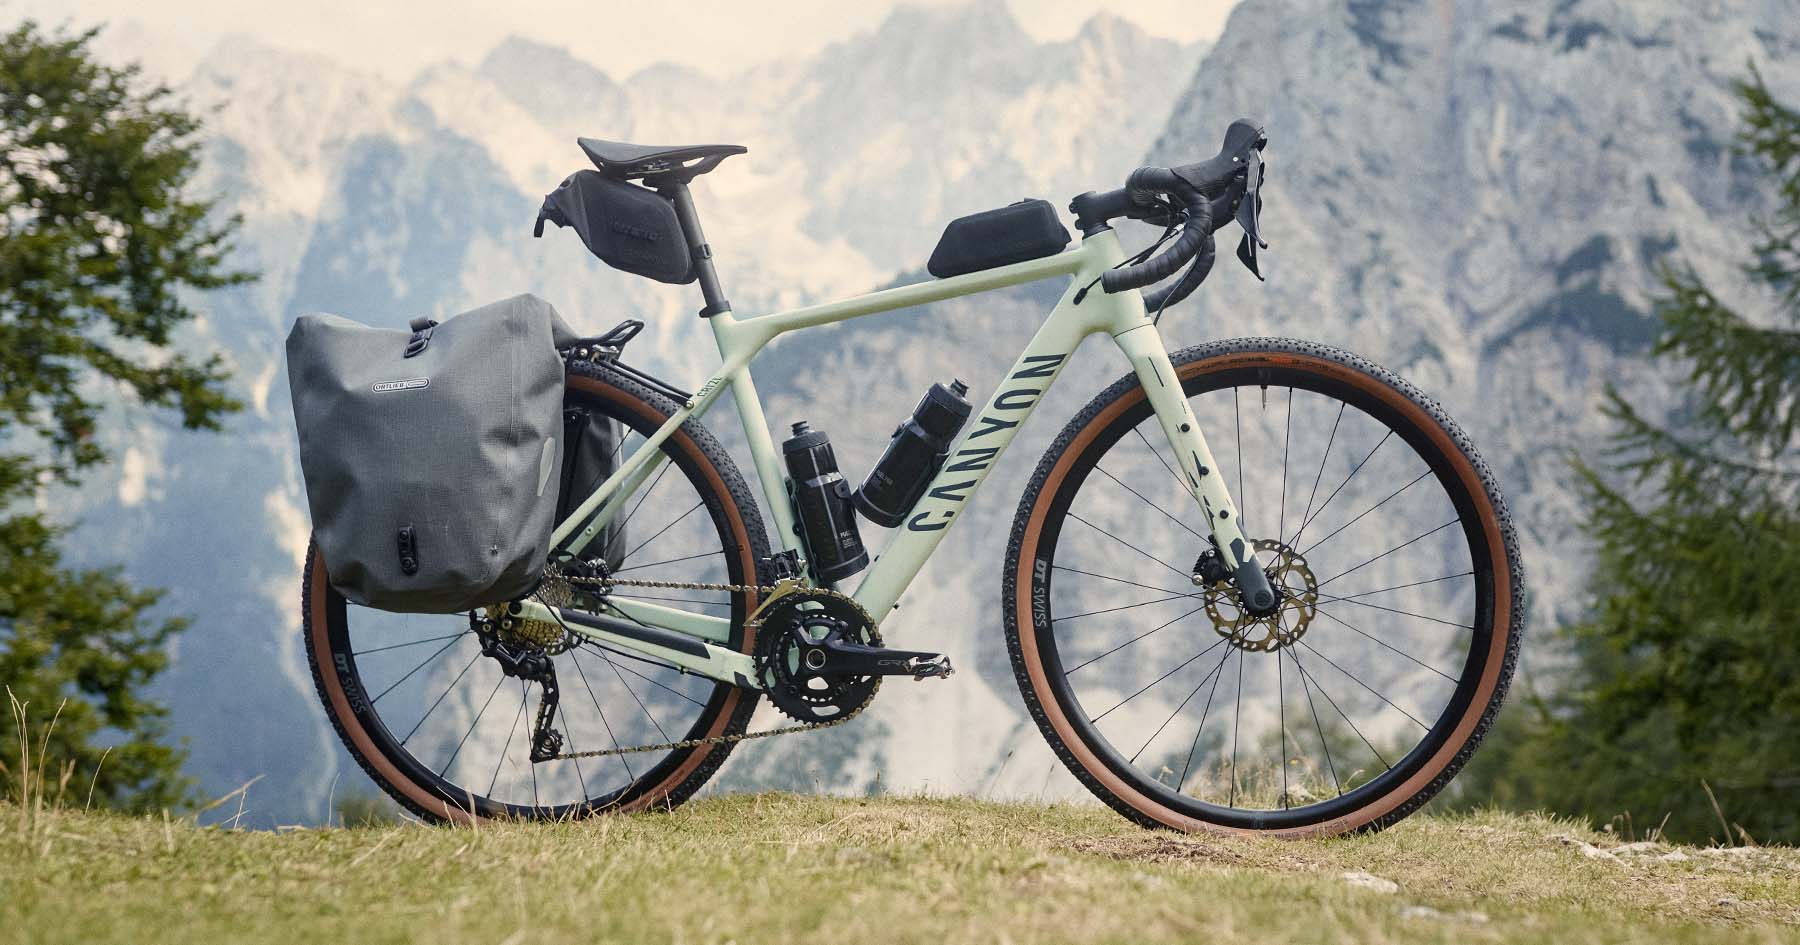 Canyon Launches More Affordable Grizl AL - BIKEPACKING.com